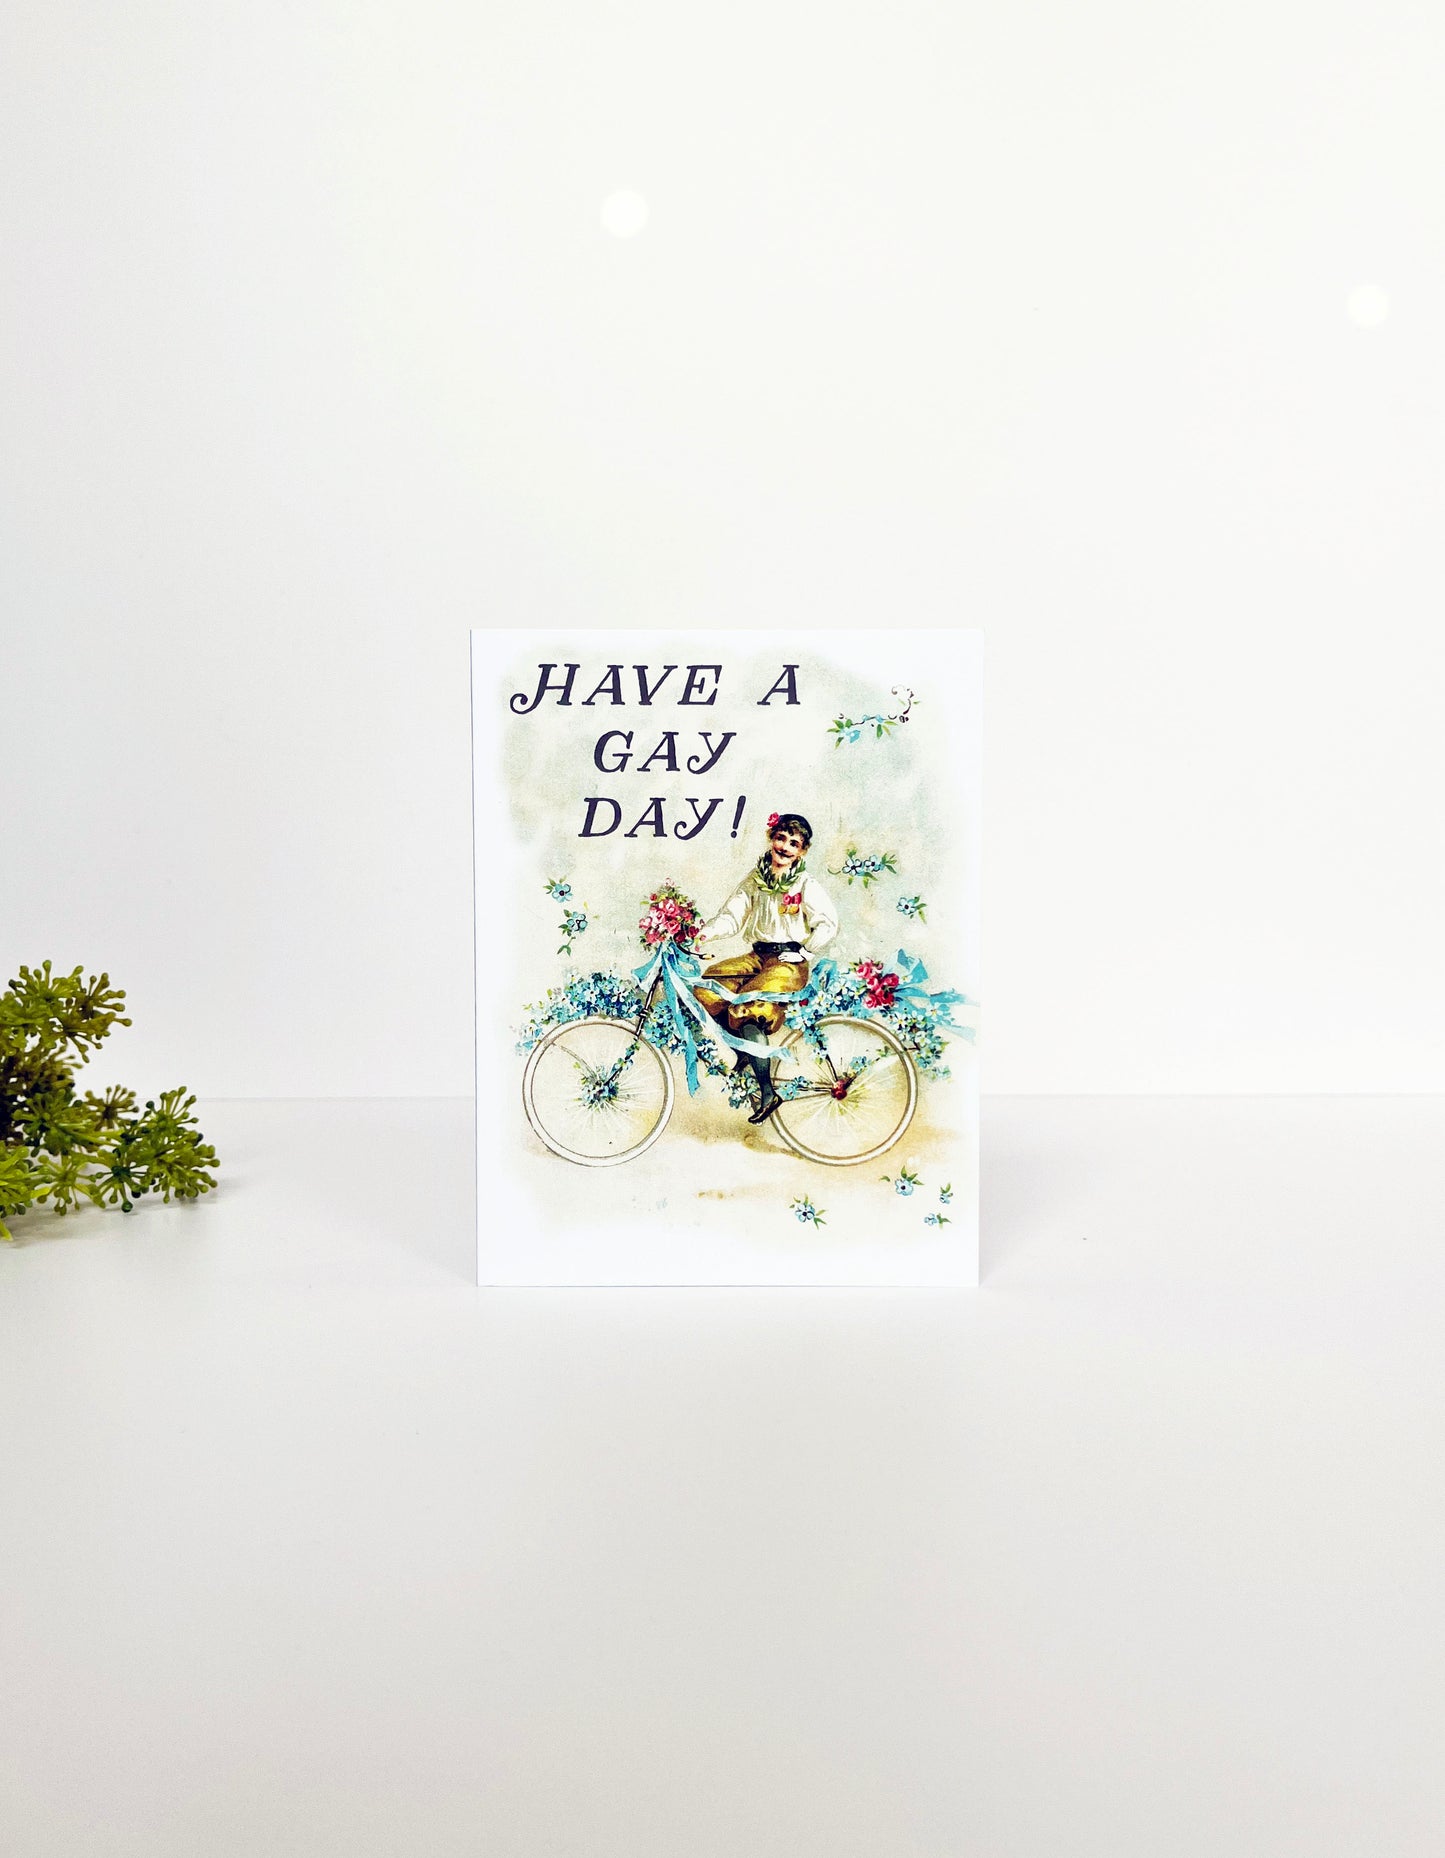 have a gay day all occasion blank inside greeting card note card mail happy event congrats congratulations just saying hello white background pastel colors flamboyant vintage man riding bike flowers ribbons celebrate celebration party surprise birthday retirement new car house lbgtq pride ally coin laundry 